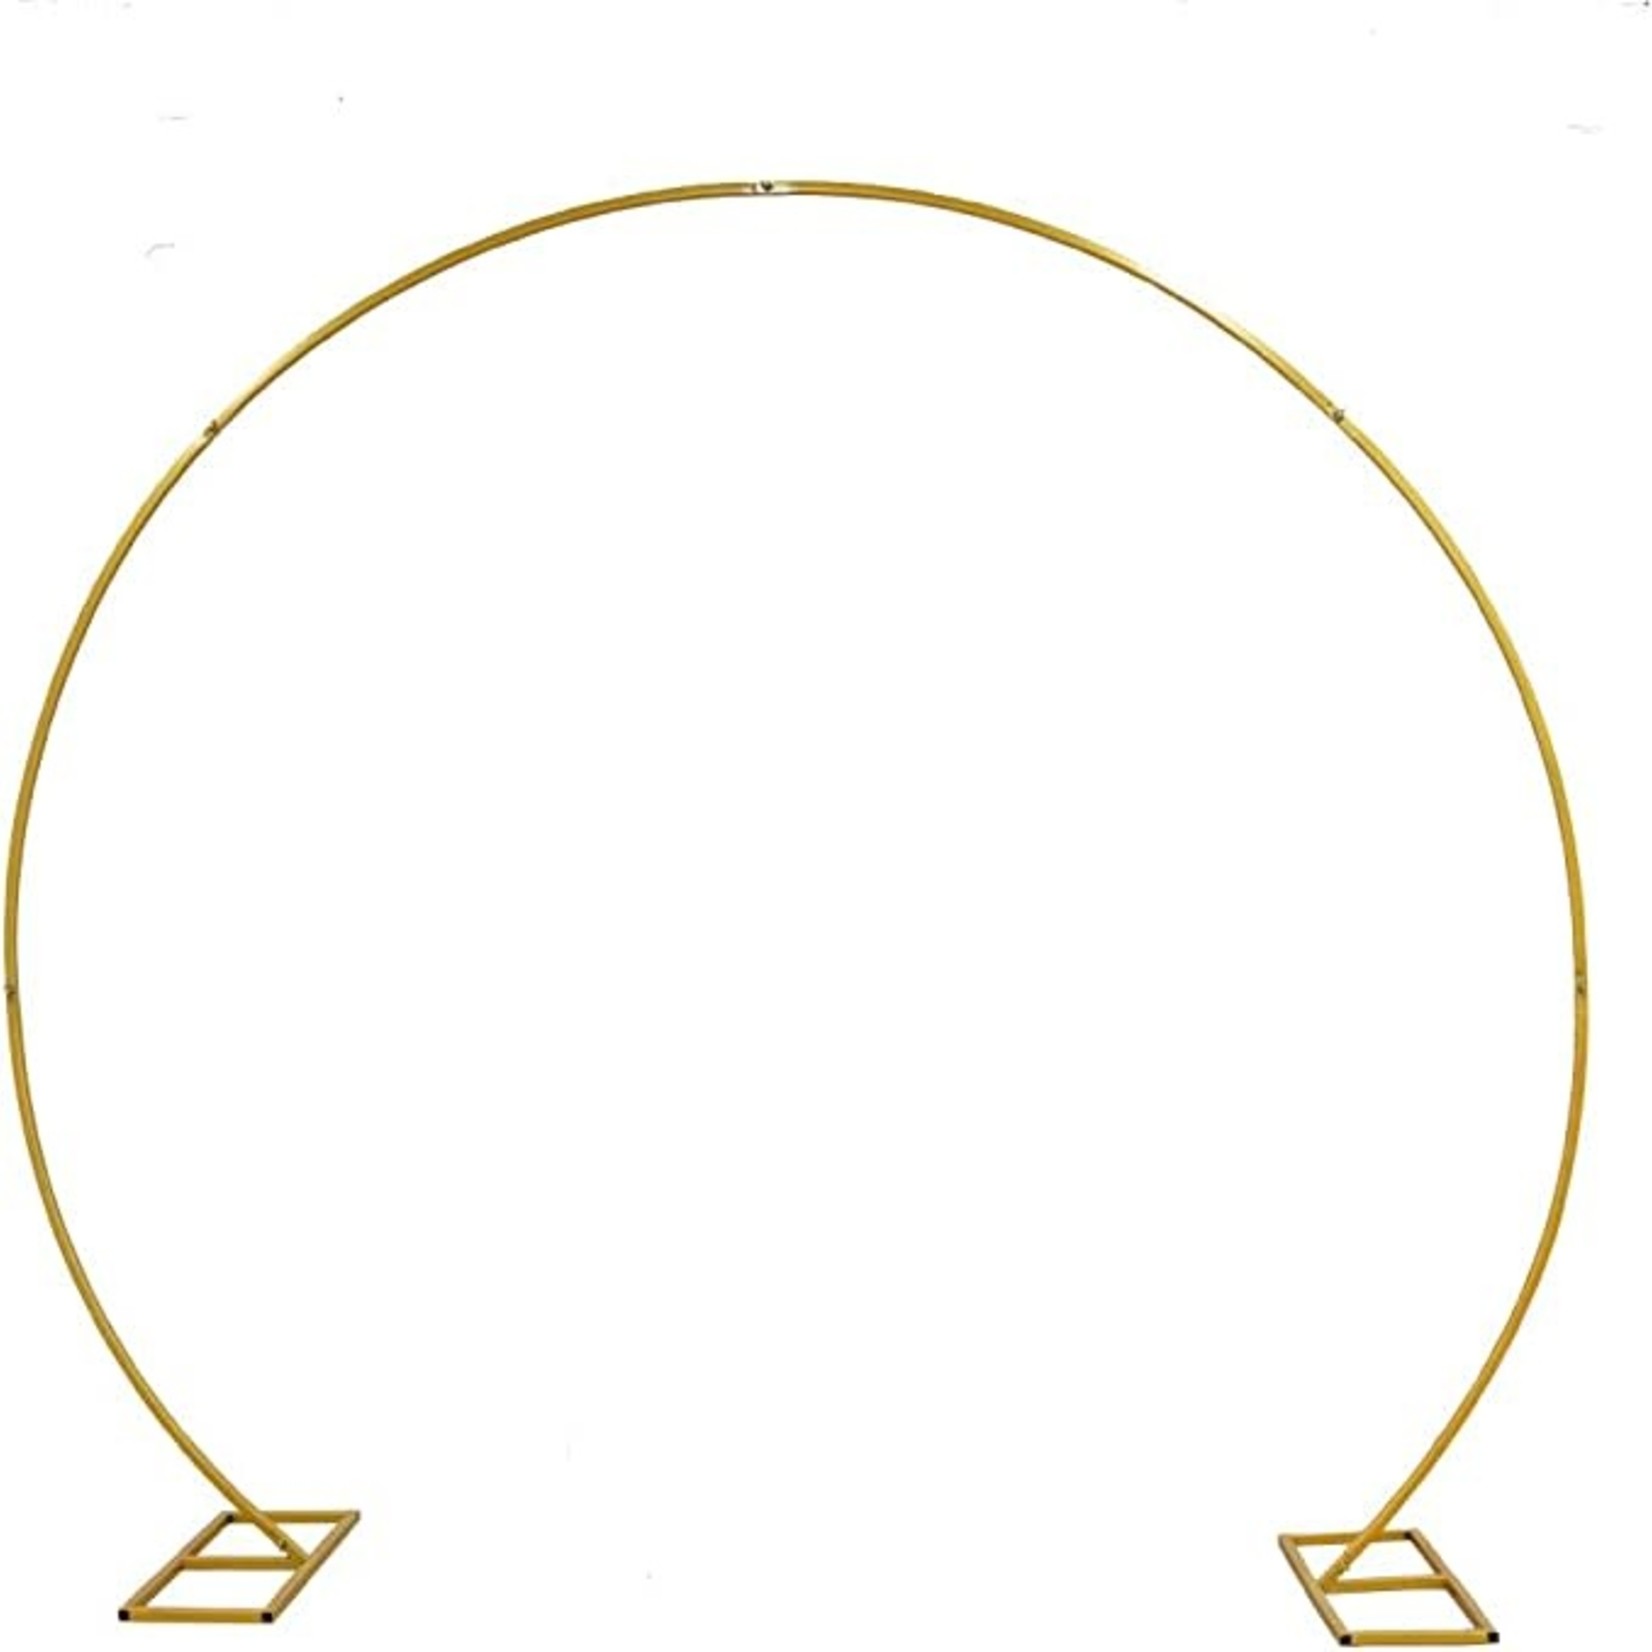 Oneyon Ceremony Arch- Gold Metal